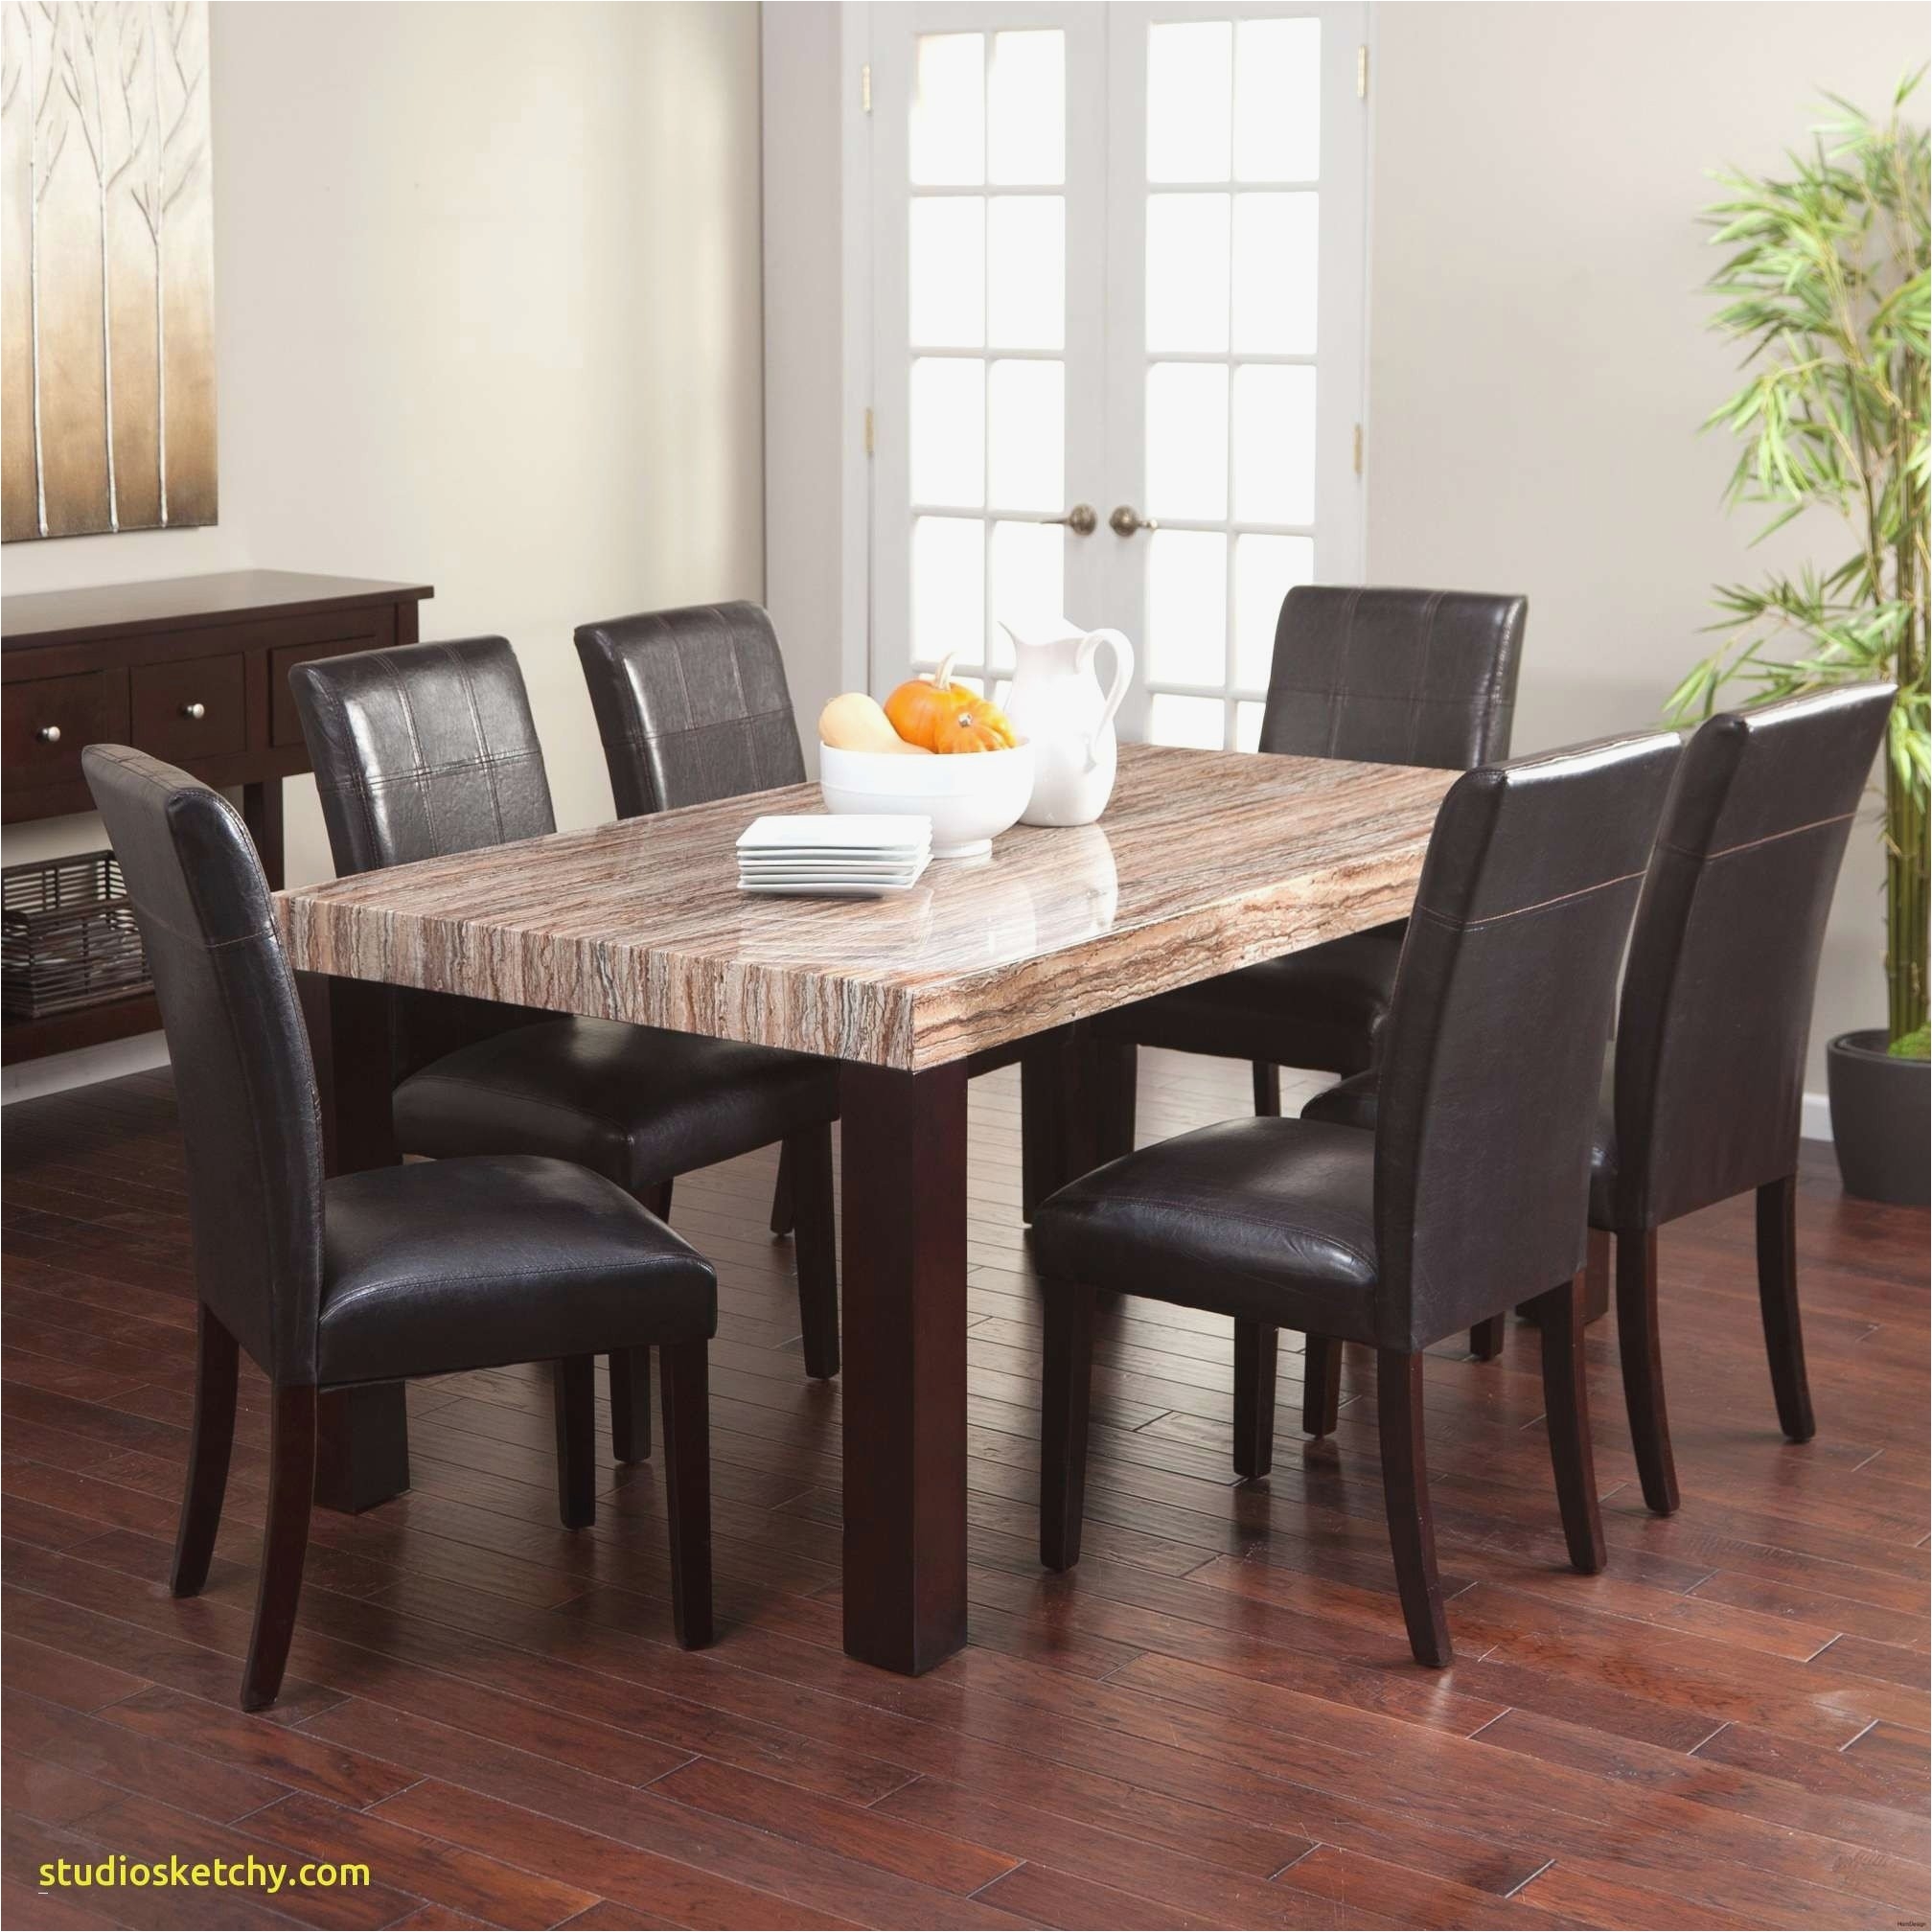 master wit205 dining table sets 7 piece home design 0d